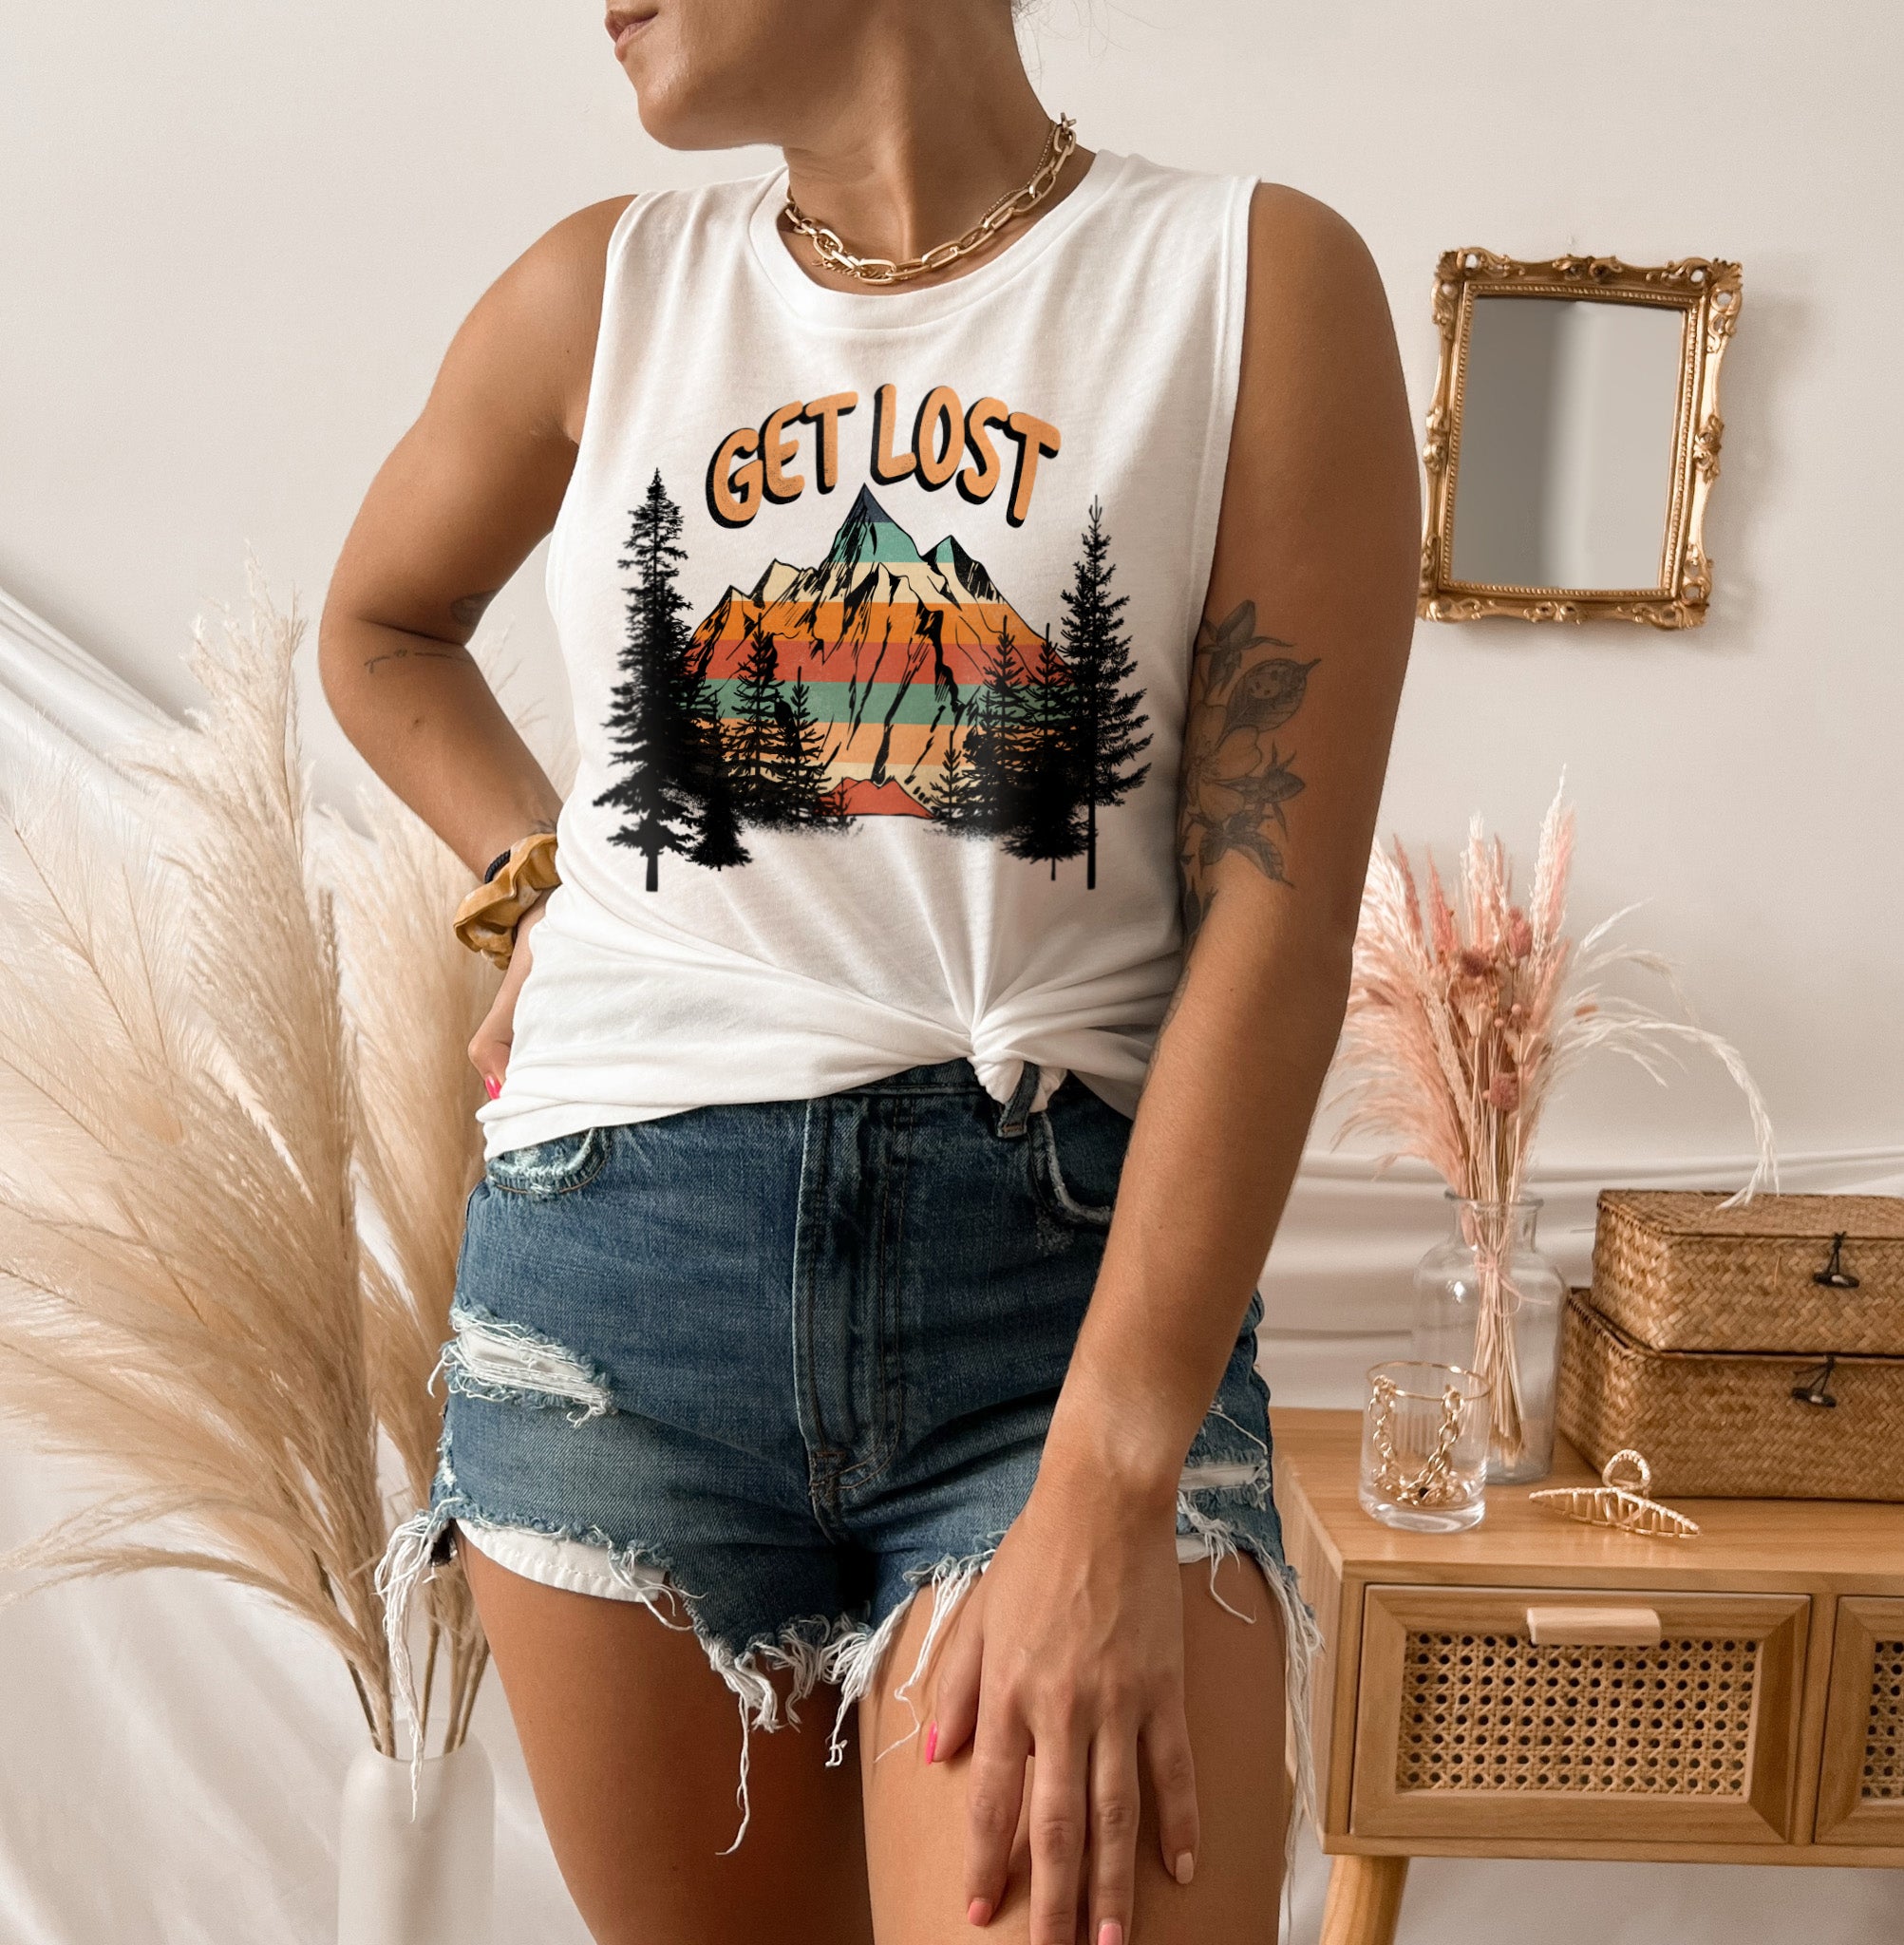 Get lost Muscle Tank